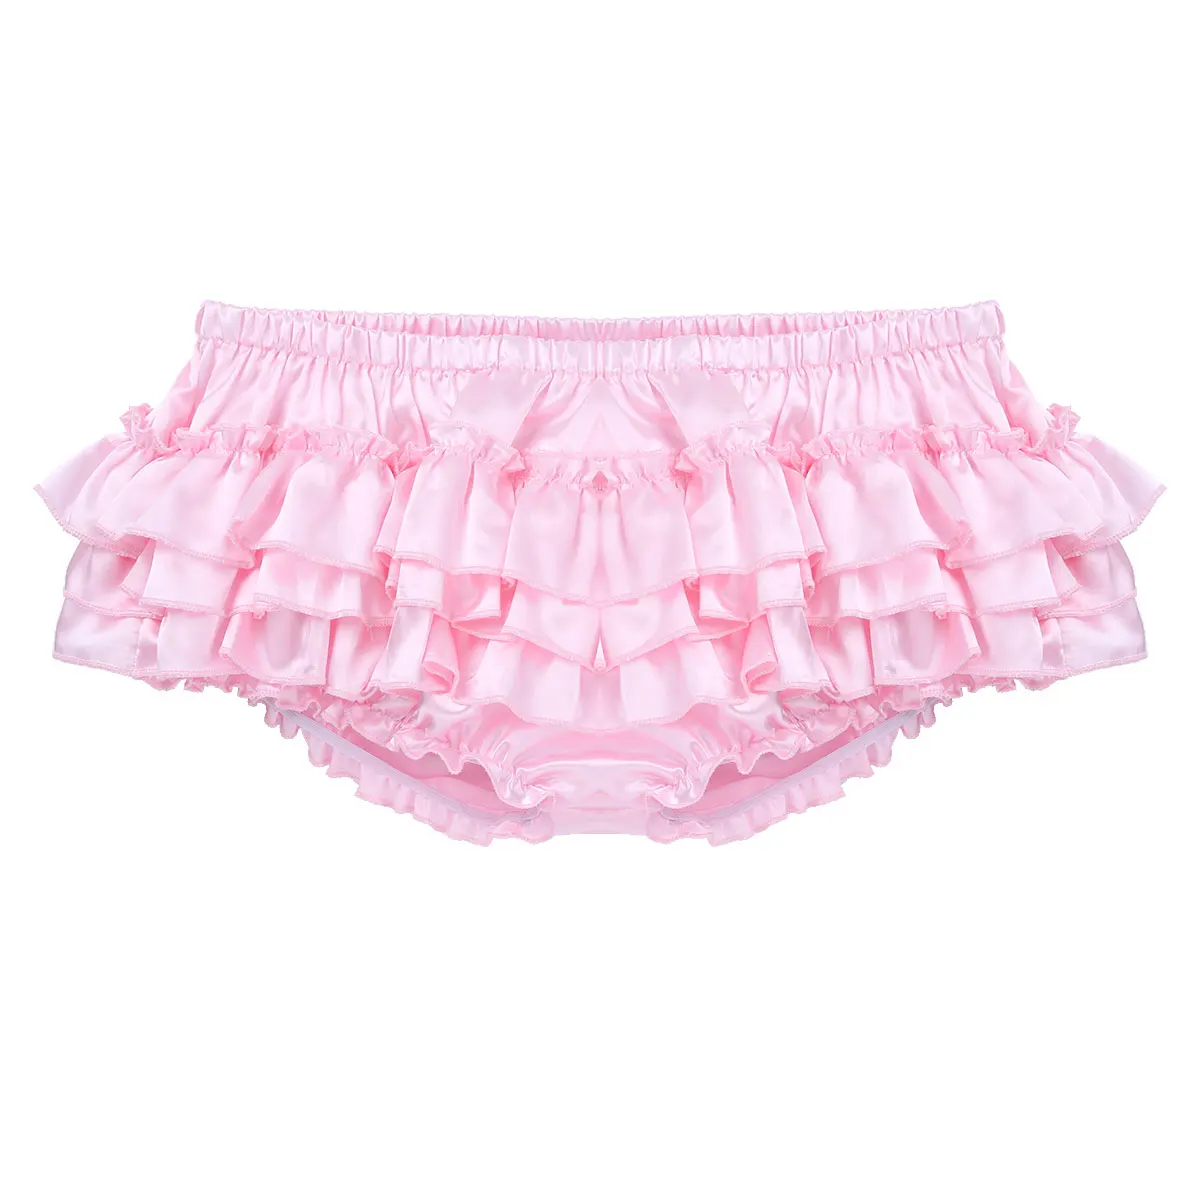 

Men's Panties Pink Sissy Male Gay Underwear Erotic Lingerie Shiny Satin Ruffled Bloomer Shorts Skirted Sexy Briefs Underpants